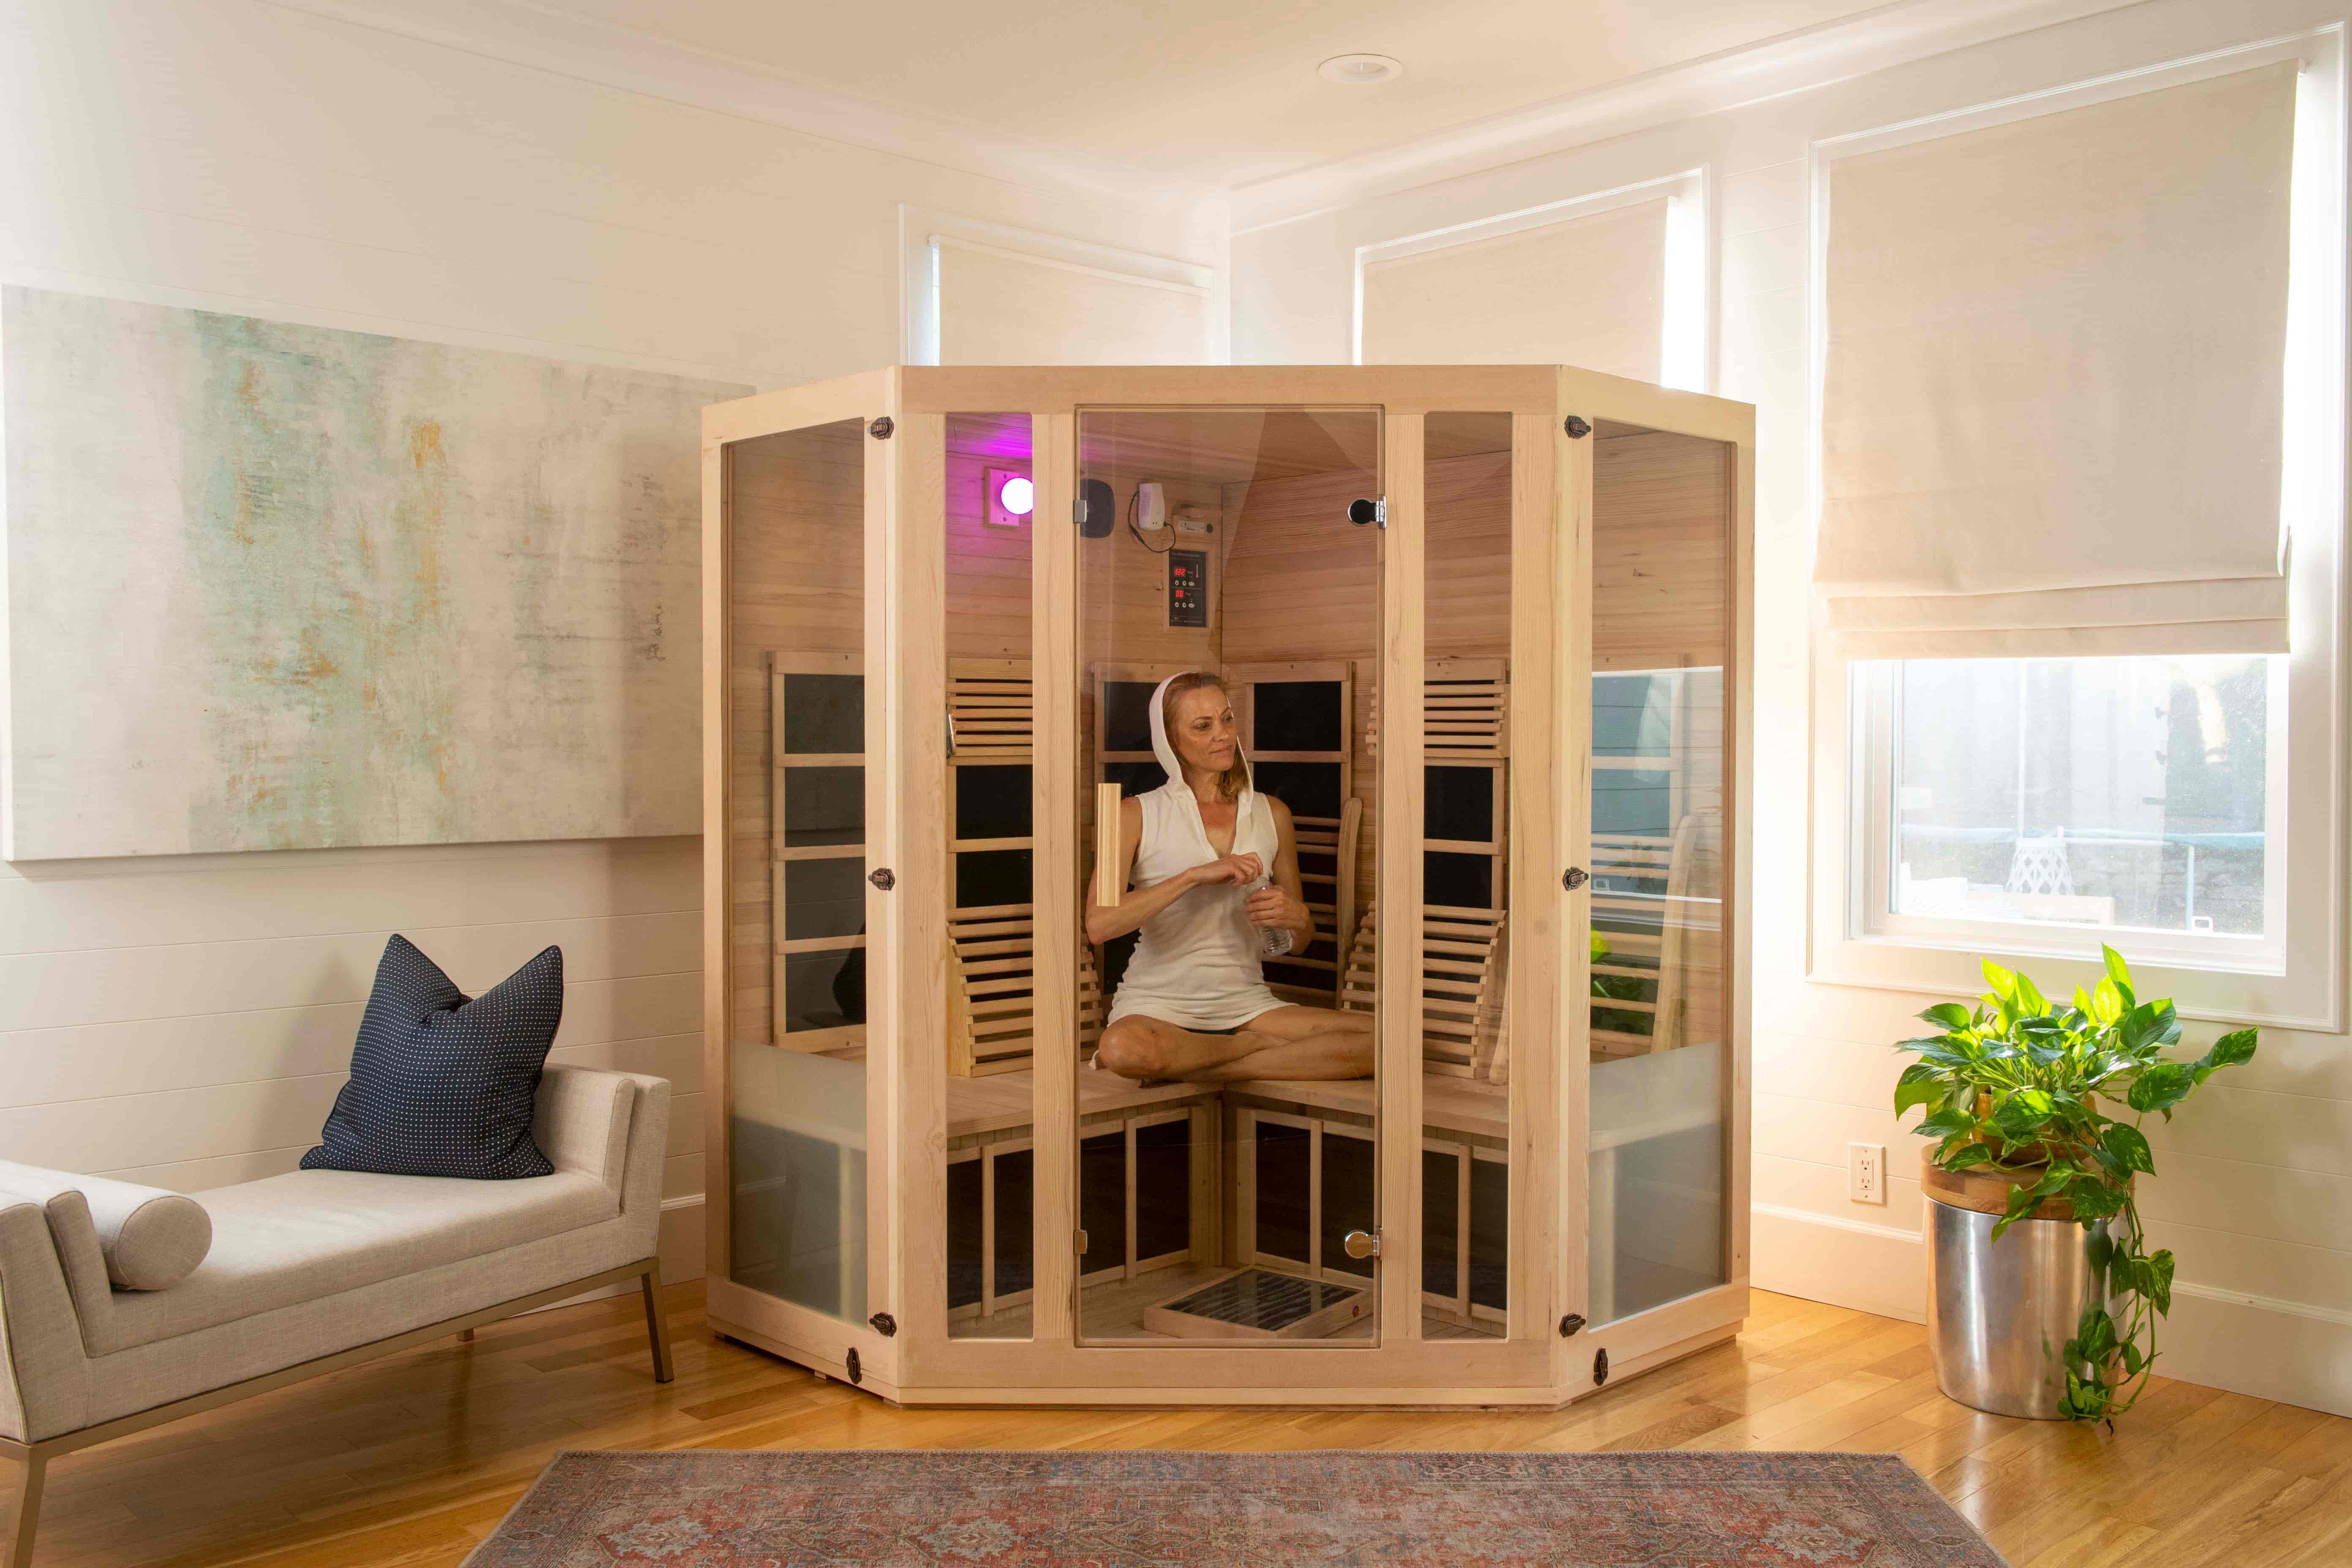 Toxins Are Everywhere: Learn How an Infrared Sauna Can Help You Detox